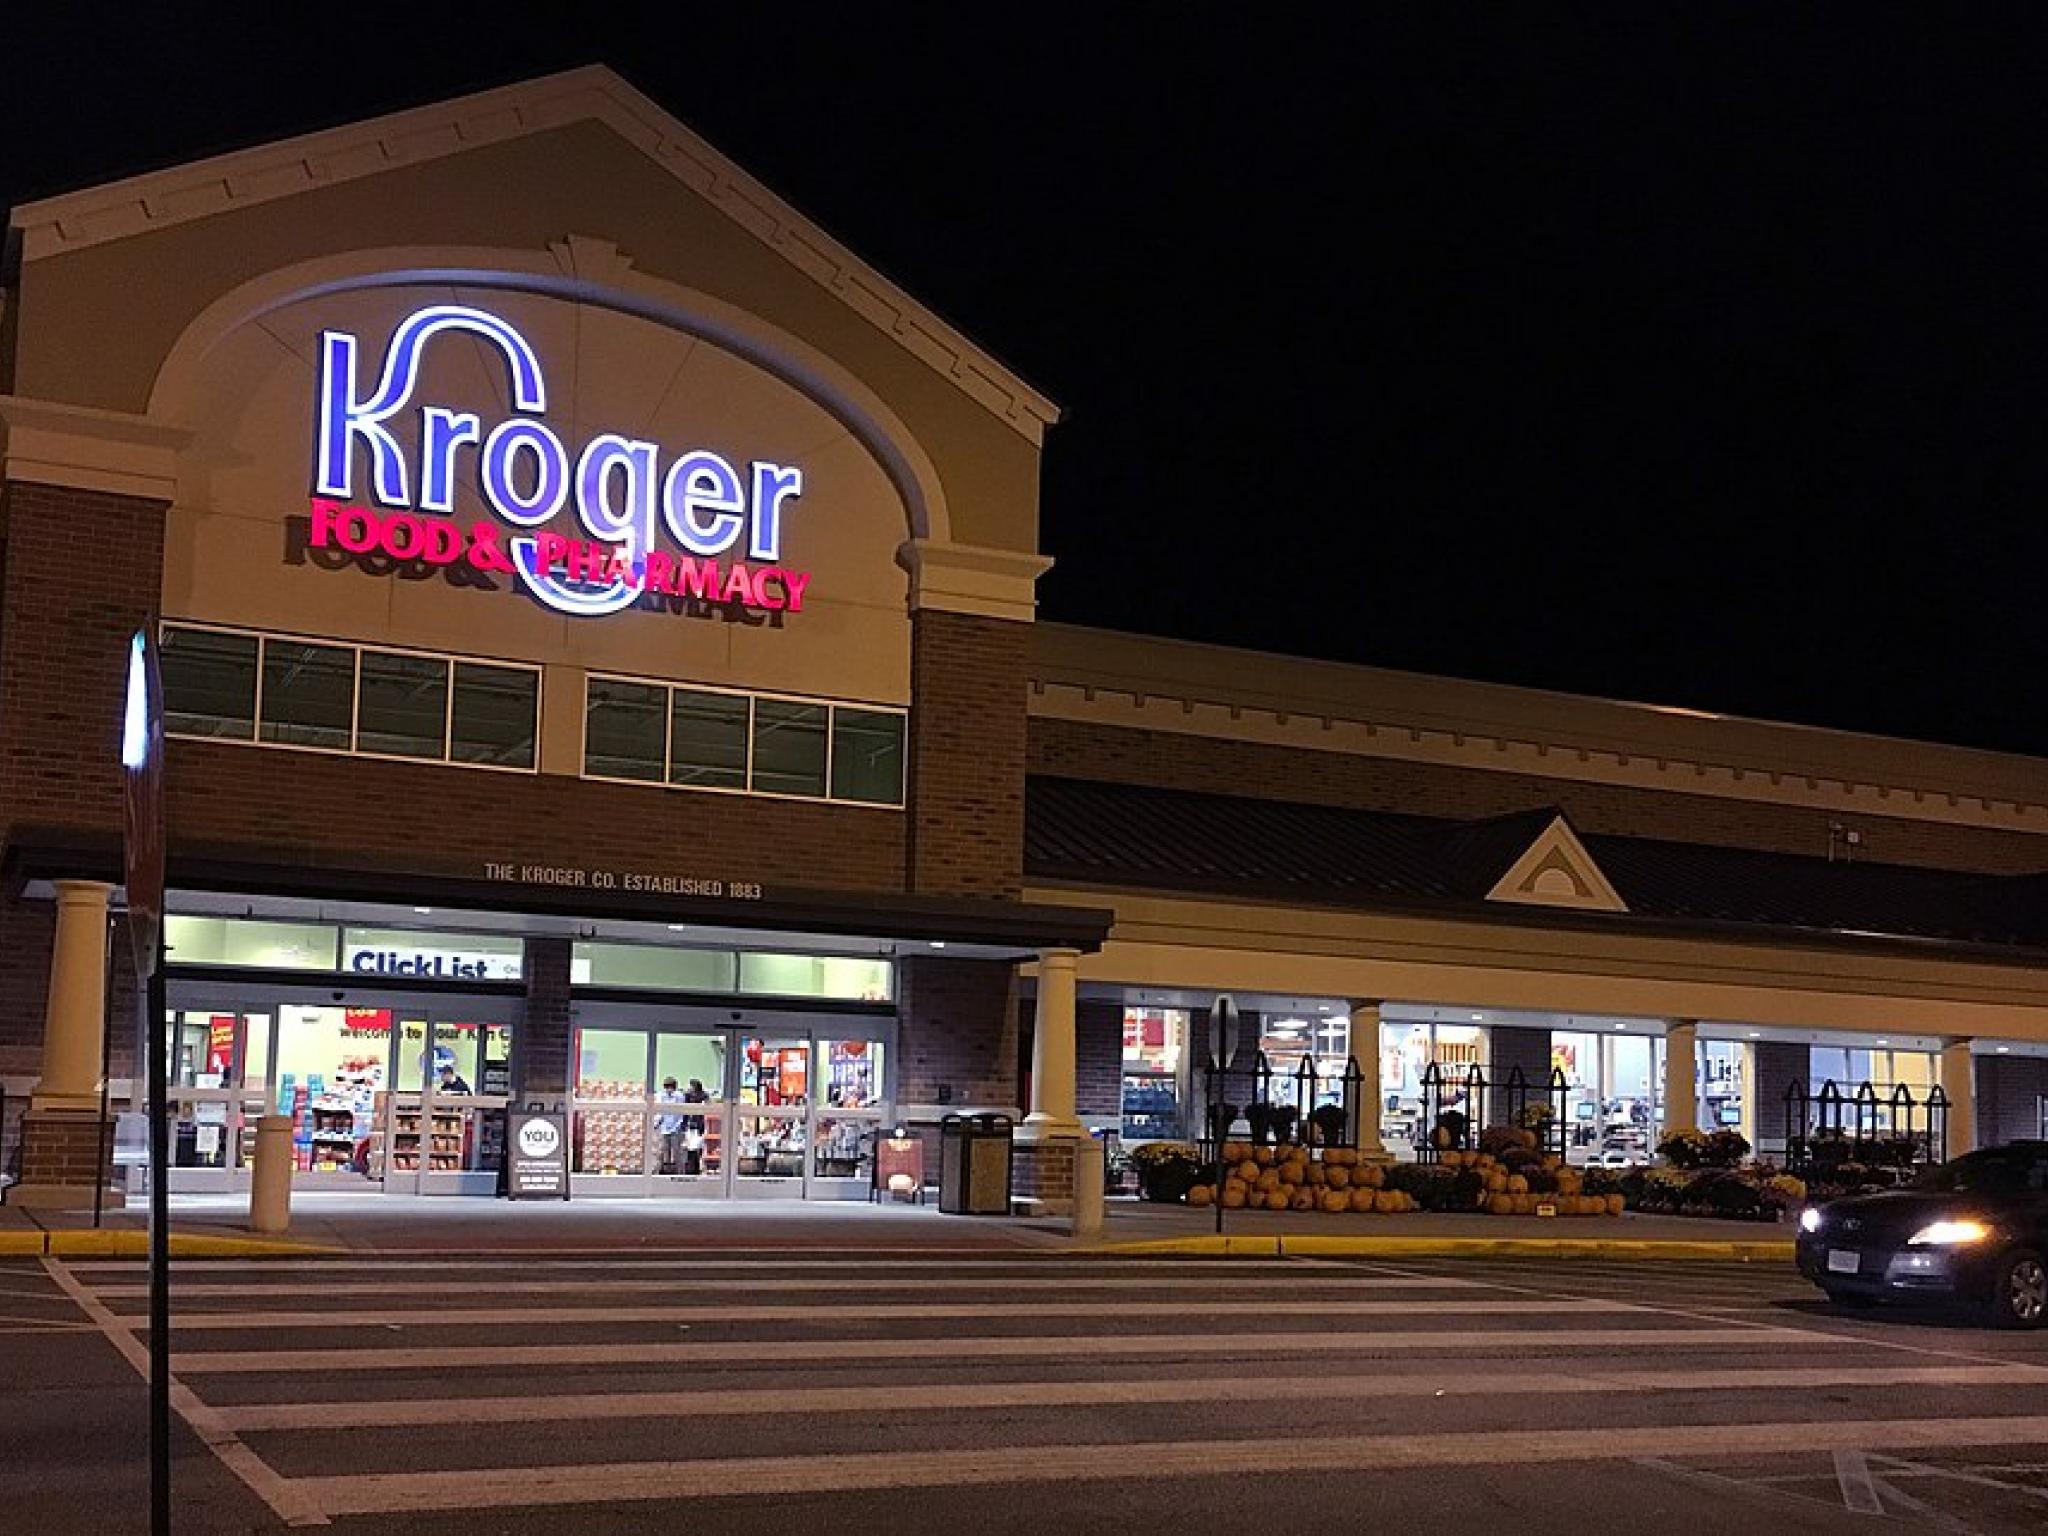  kroger-gears-up-for-q1-print-these-most-accurate-analysts-revise-forecasts-ahead-of-earnings-call 